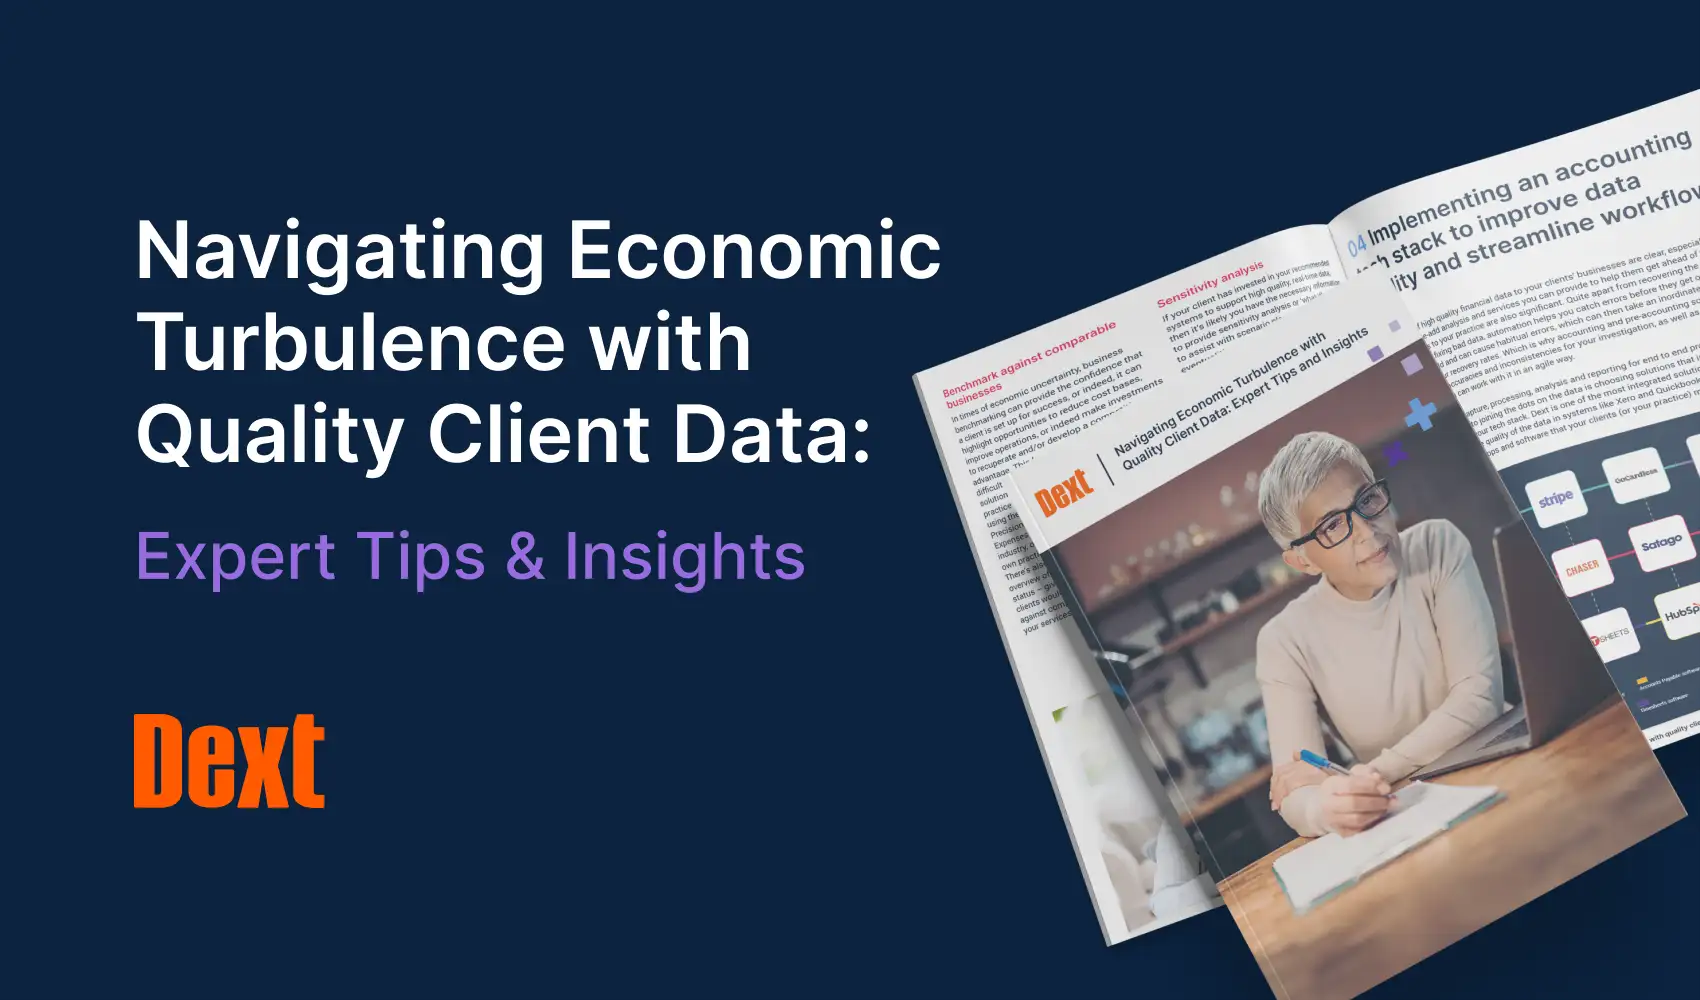 Navigating economic turbulence with quality client data image